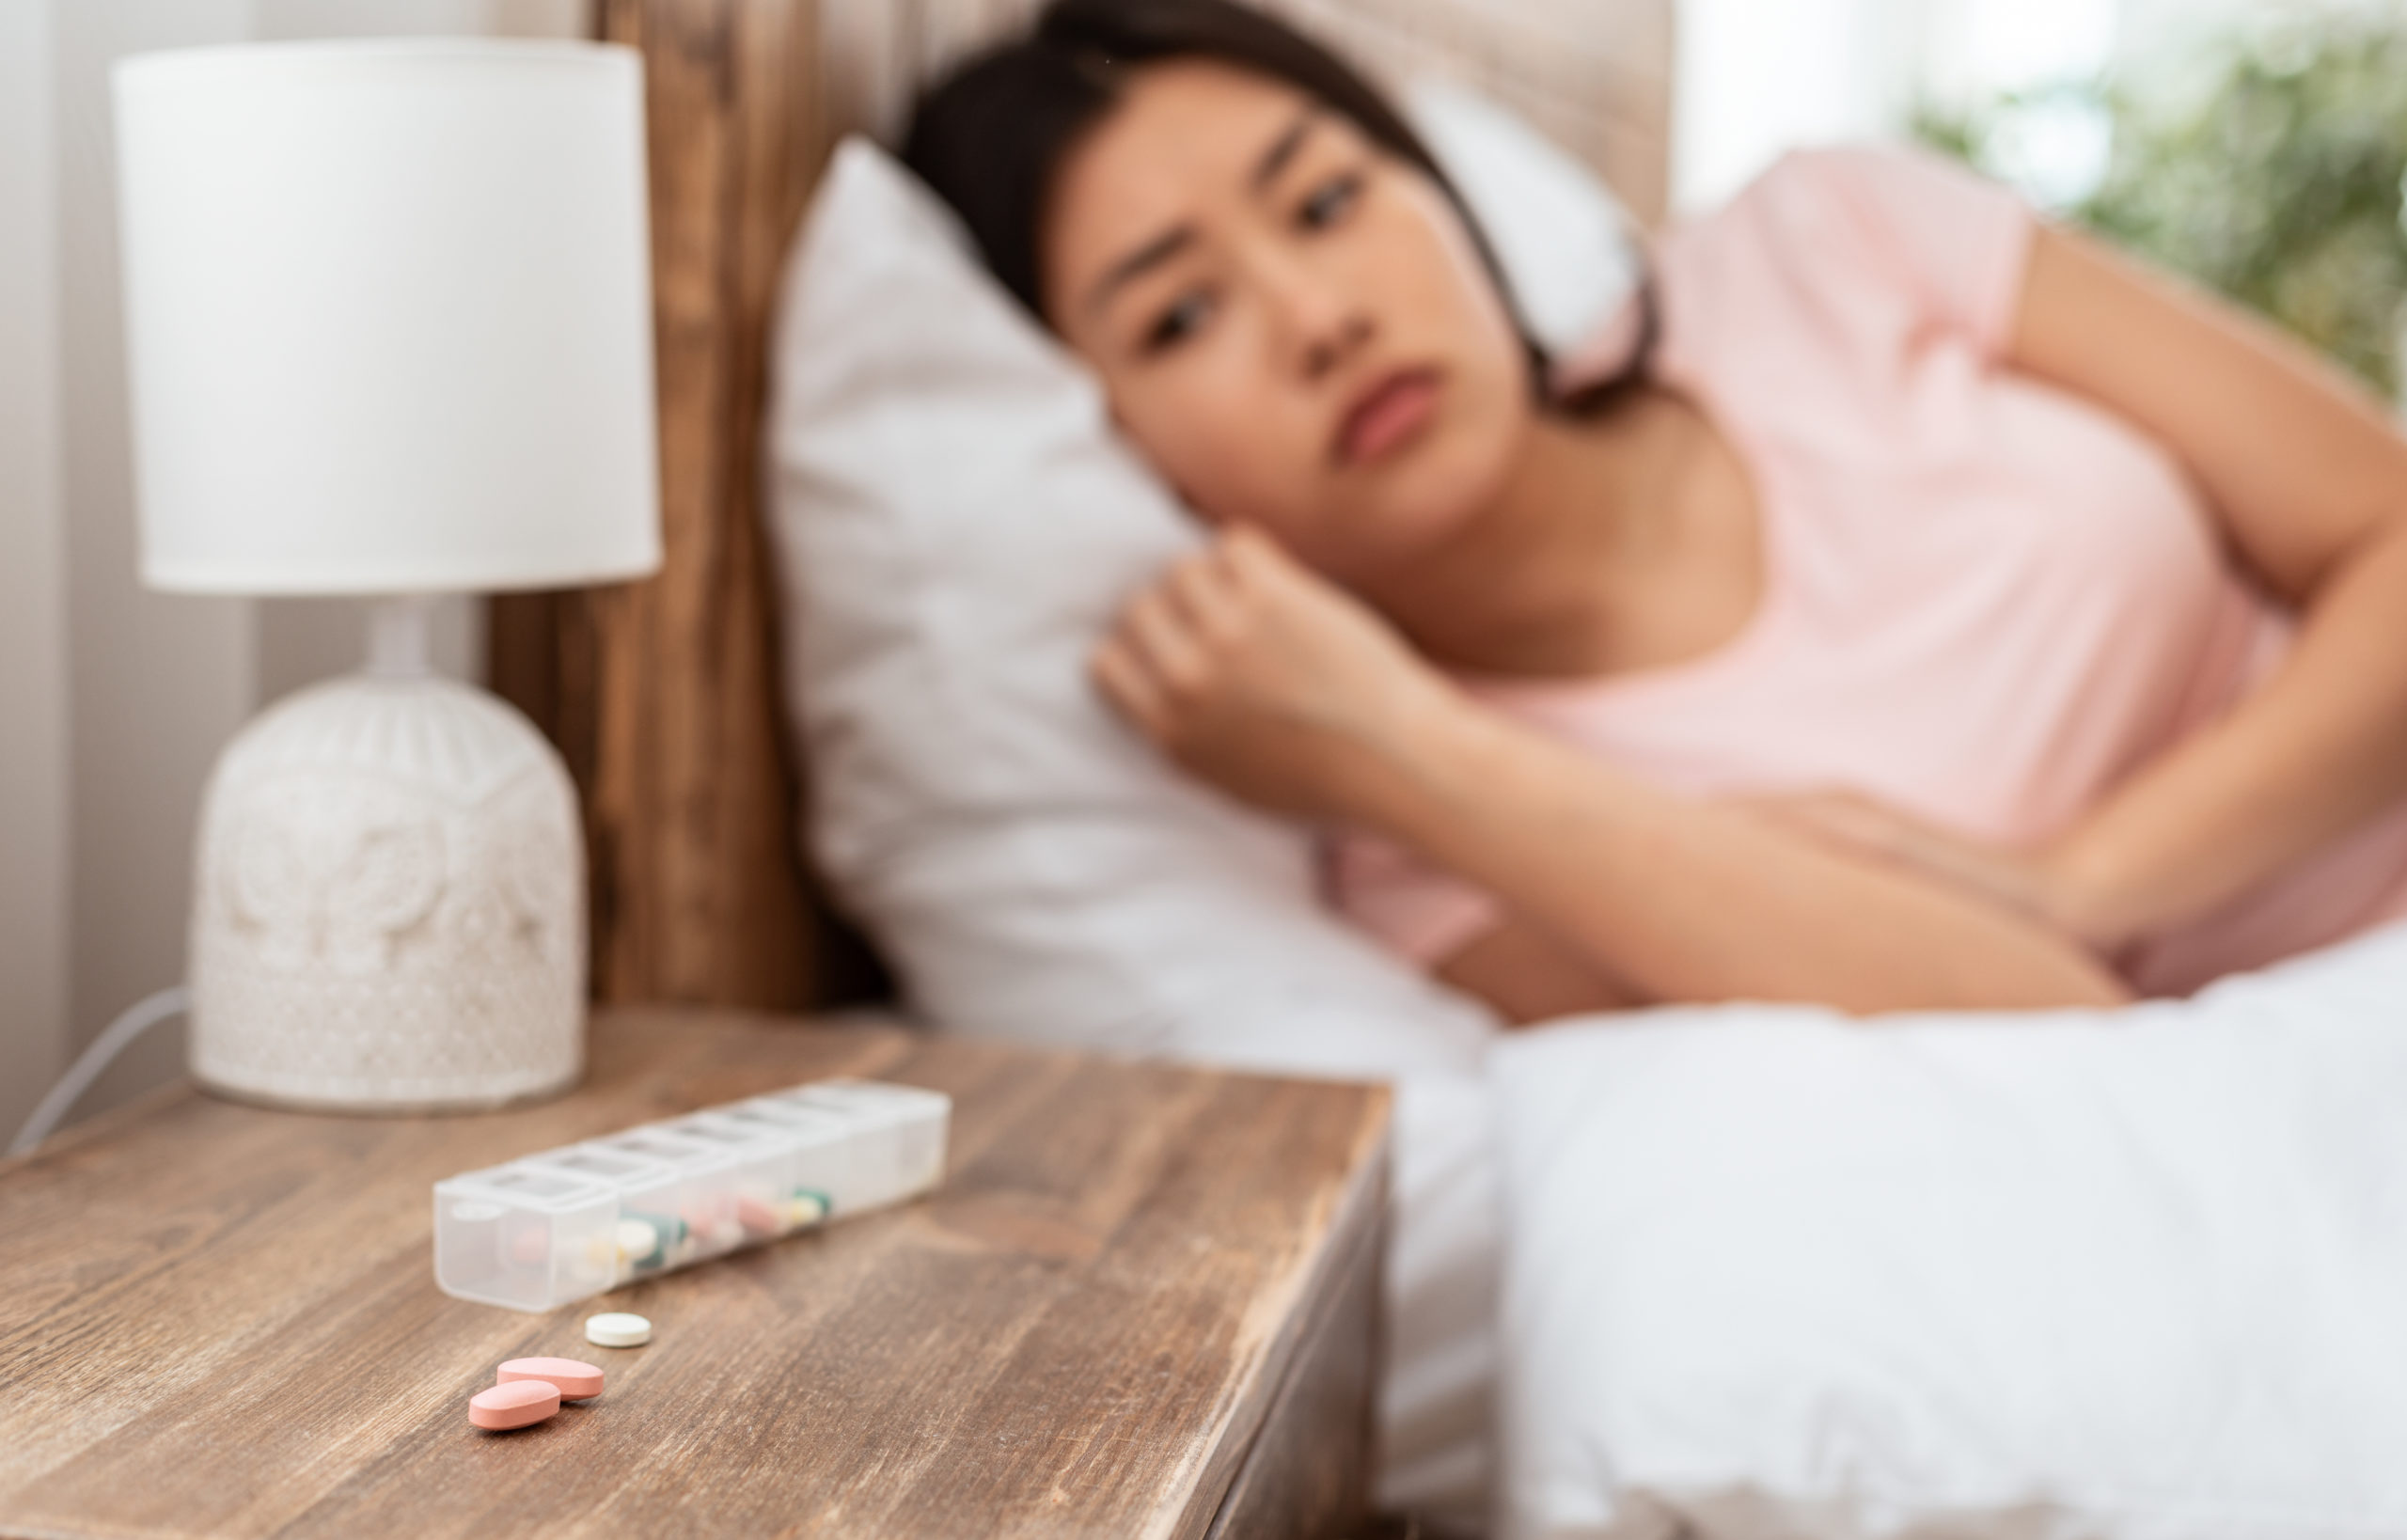 Women Restless with sleeping pills on bedside table